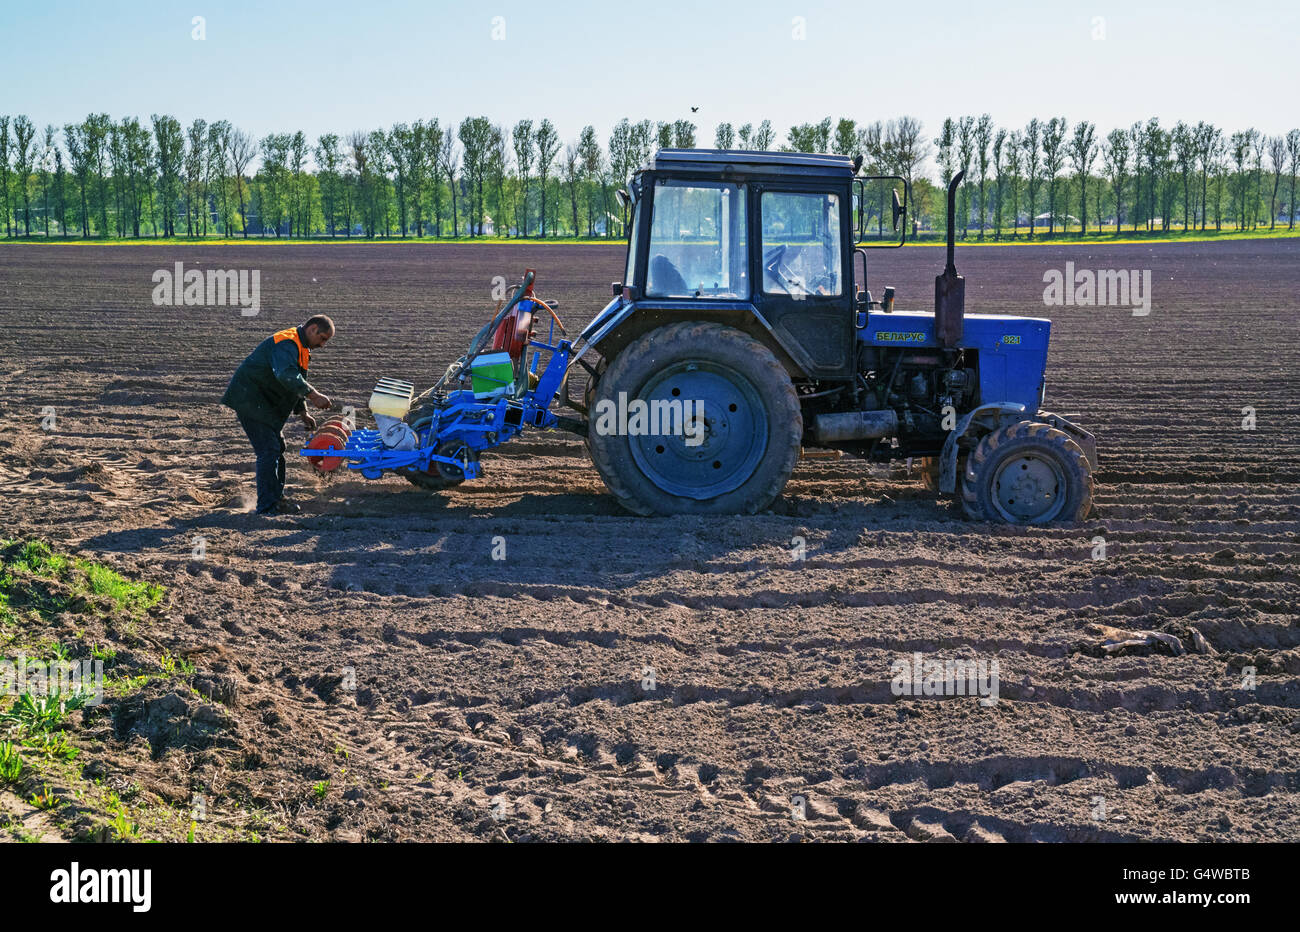 The peasant works at an agricultural field at tractor. Stock Photo